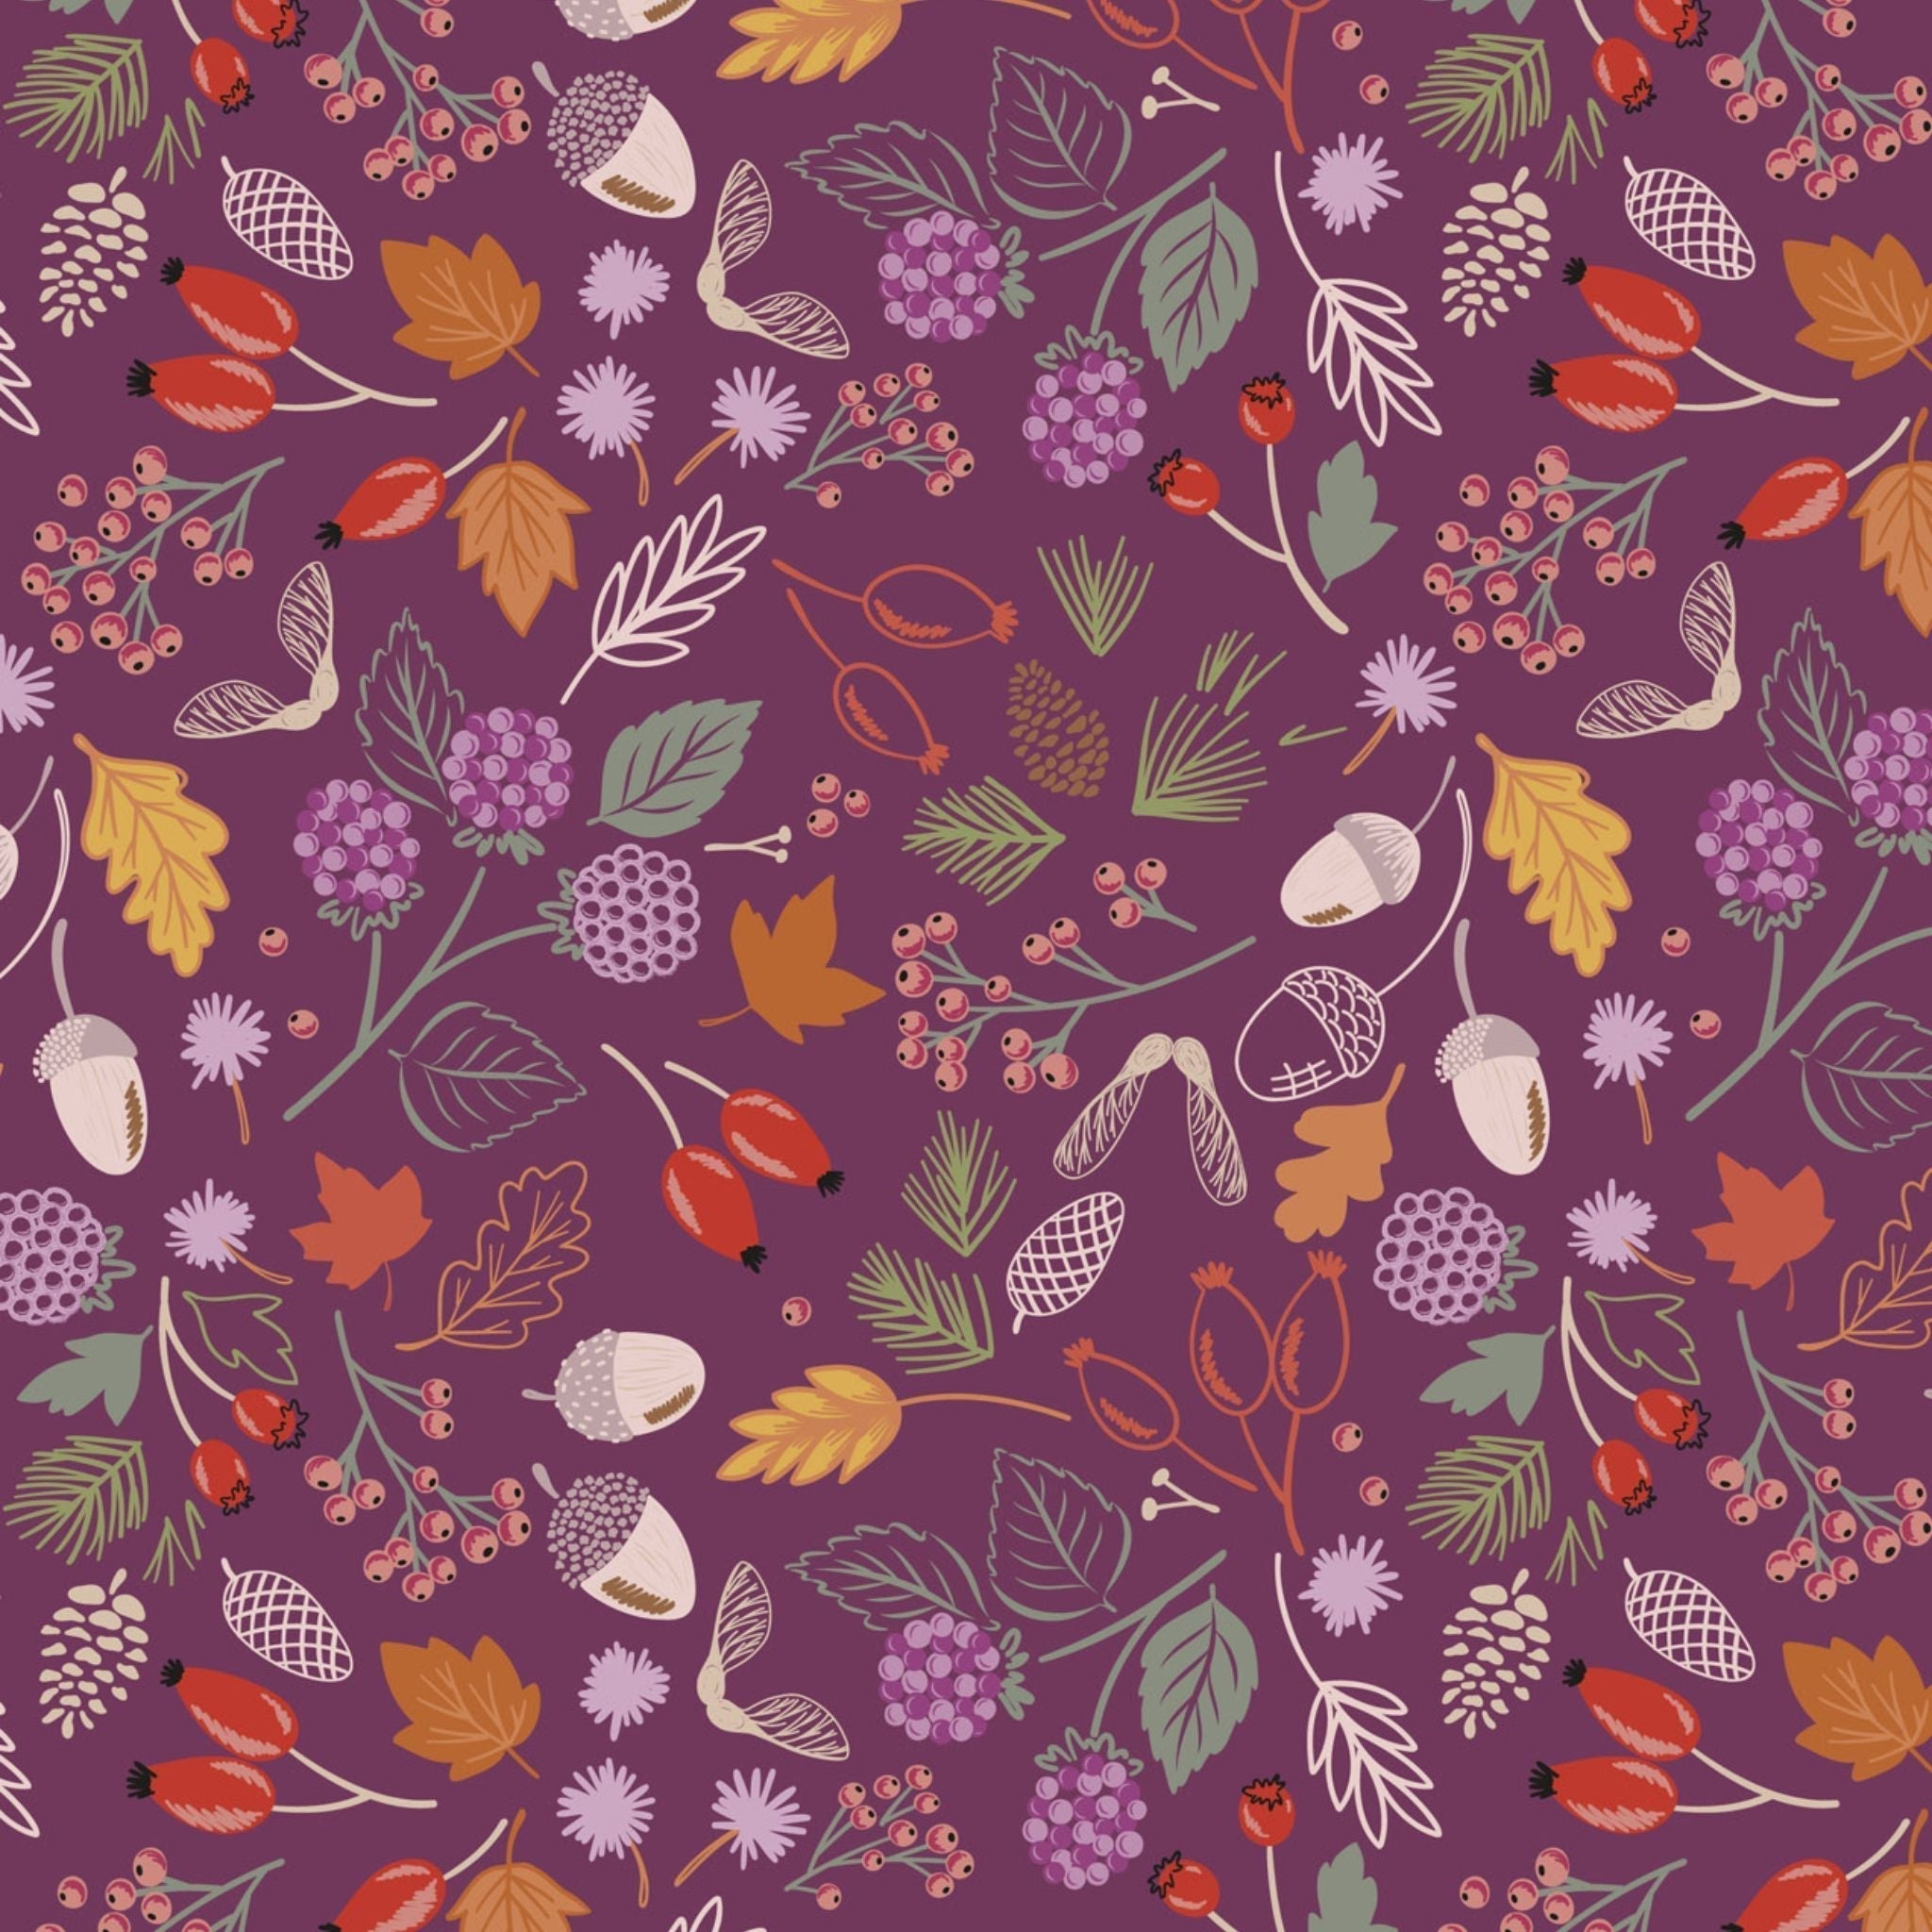 Woodland foliage with berries on purple cotton fabric - Squirrelled Away by Lewis and Irene